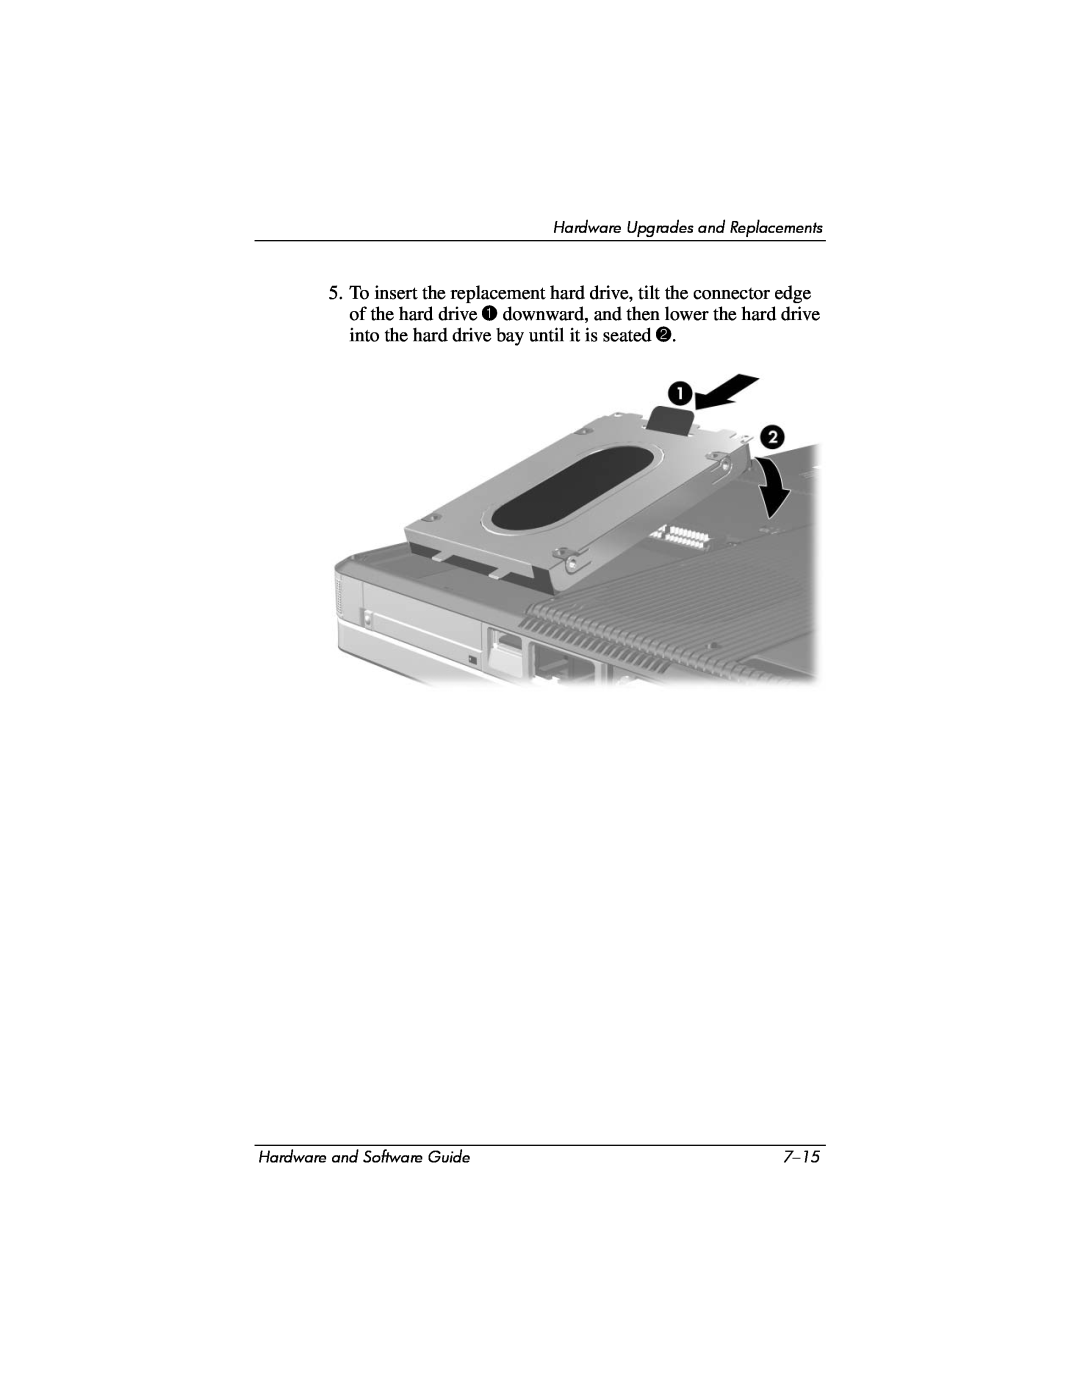 Compaq Presario M2000 manual Hardware Upgrades and Replacements, Hardware and Software Guide, 7-15 